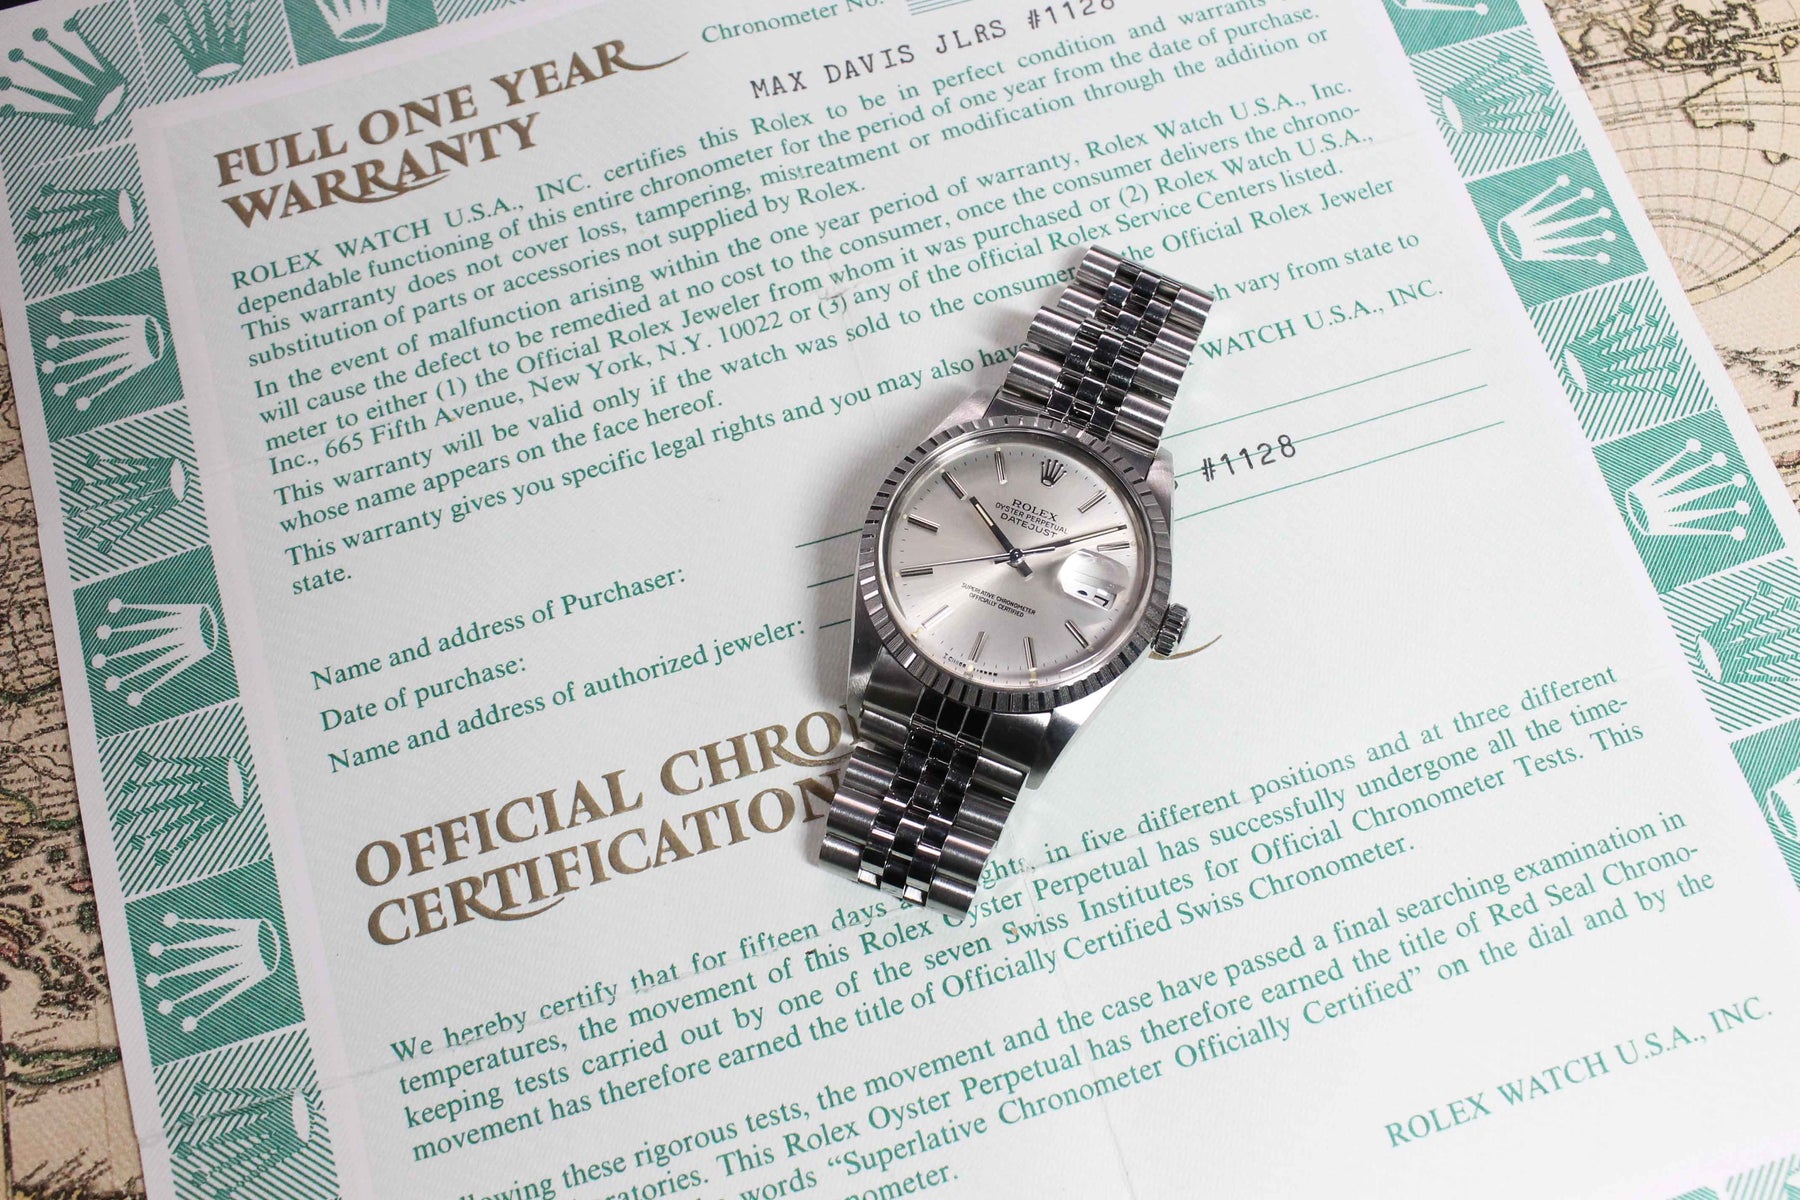 Rolex Datejust Ref. 16030 Year 1987 (with Papers)